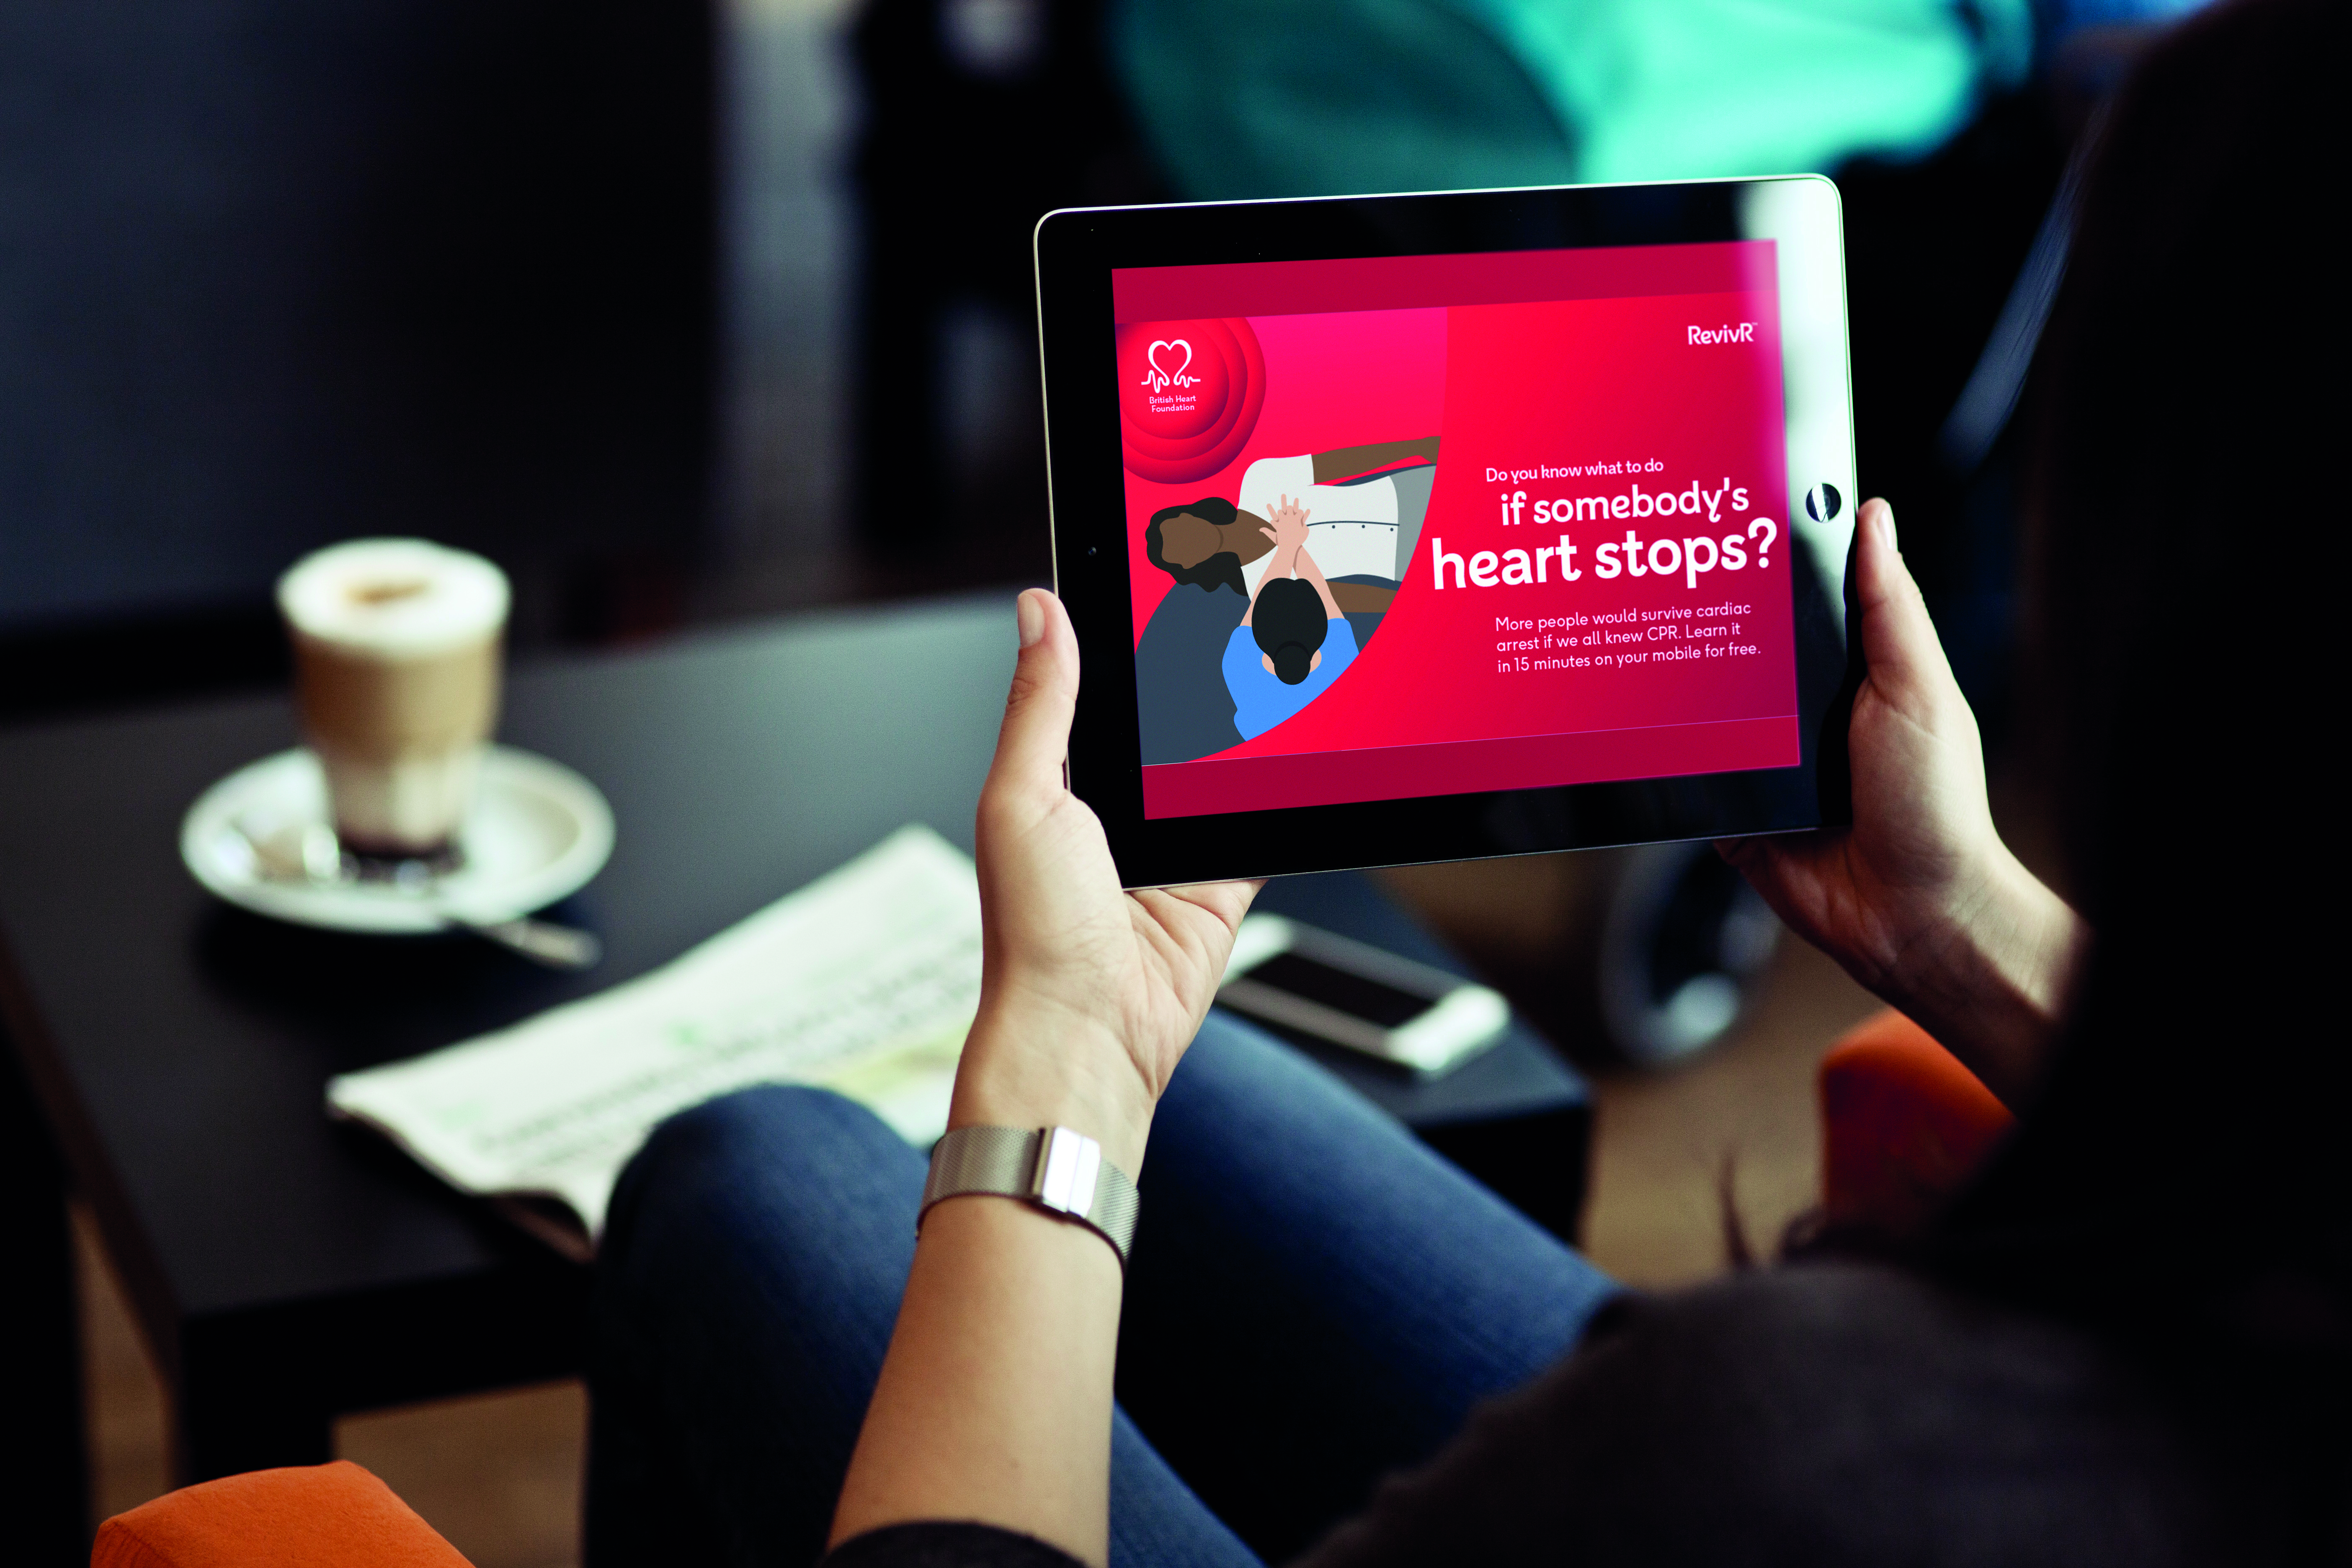 The BHF said that in just 15 minutes the RevivR app shows when and how to do CPR to save someone’s life (BHF/PA)